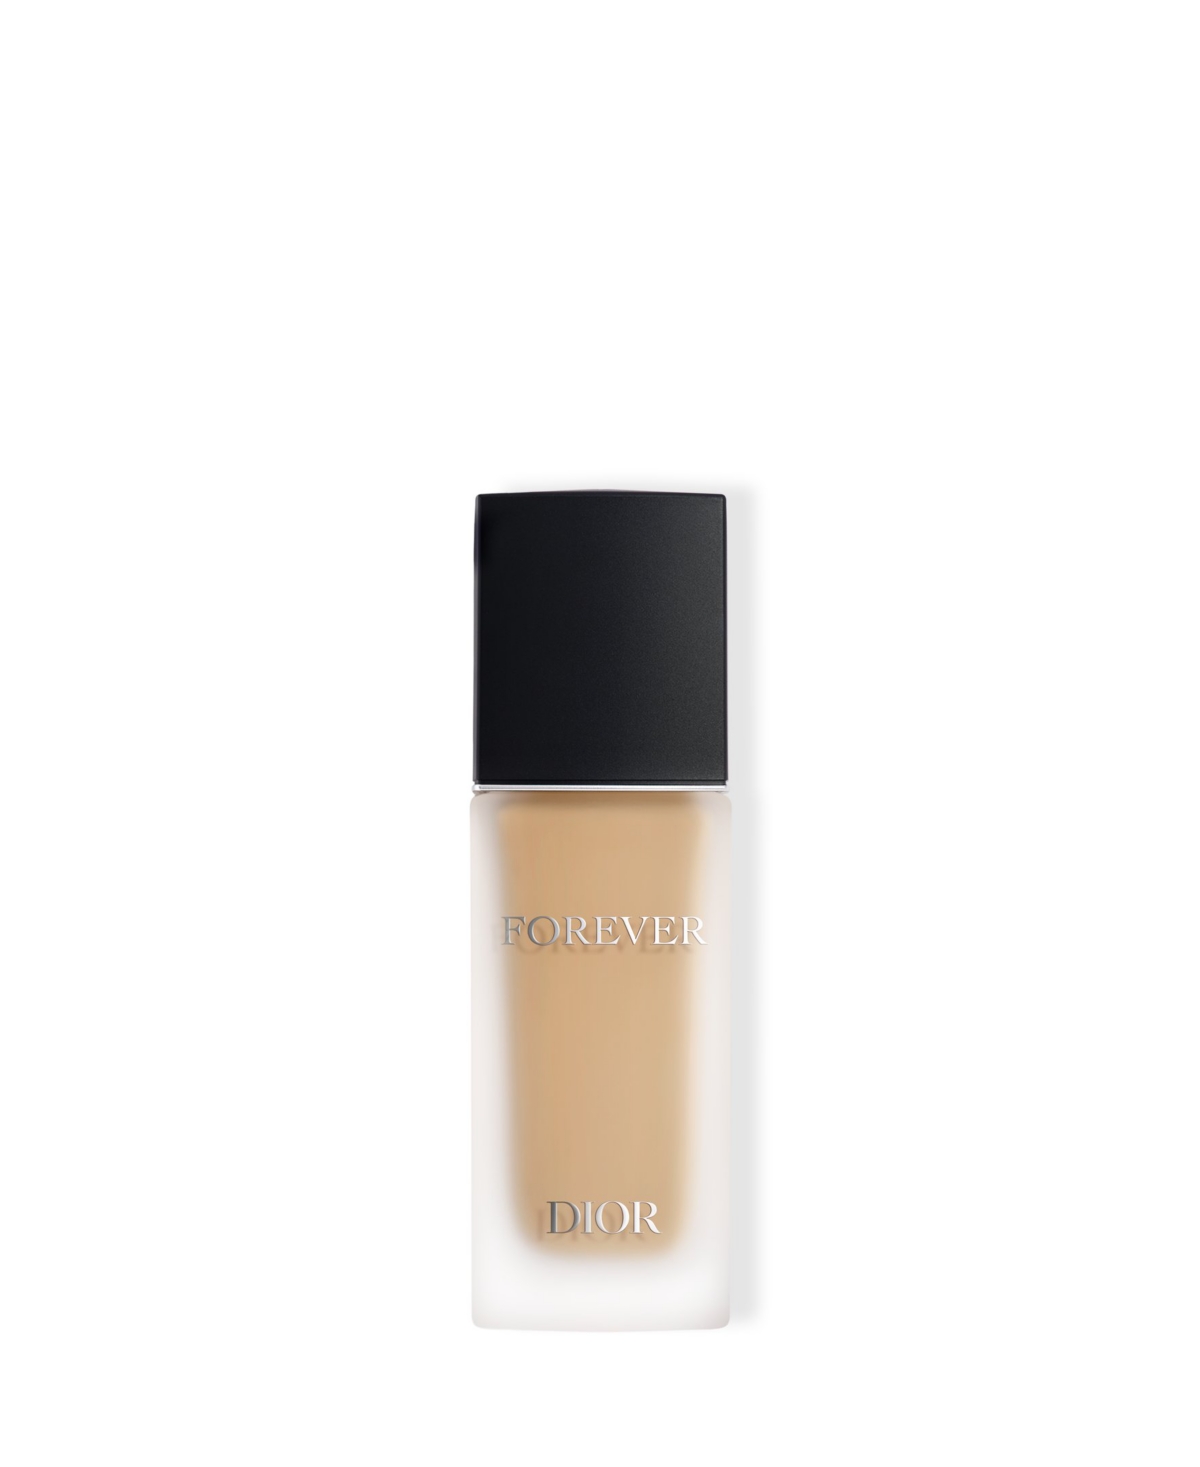 Dior Forever Matte Skincare Foundation Spf 15 In Warm Olive (light Skin With Warm Olive T